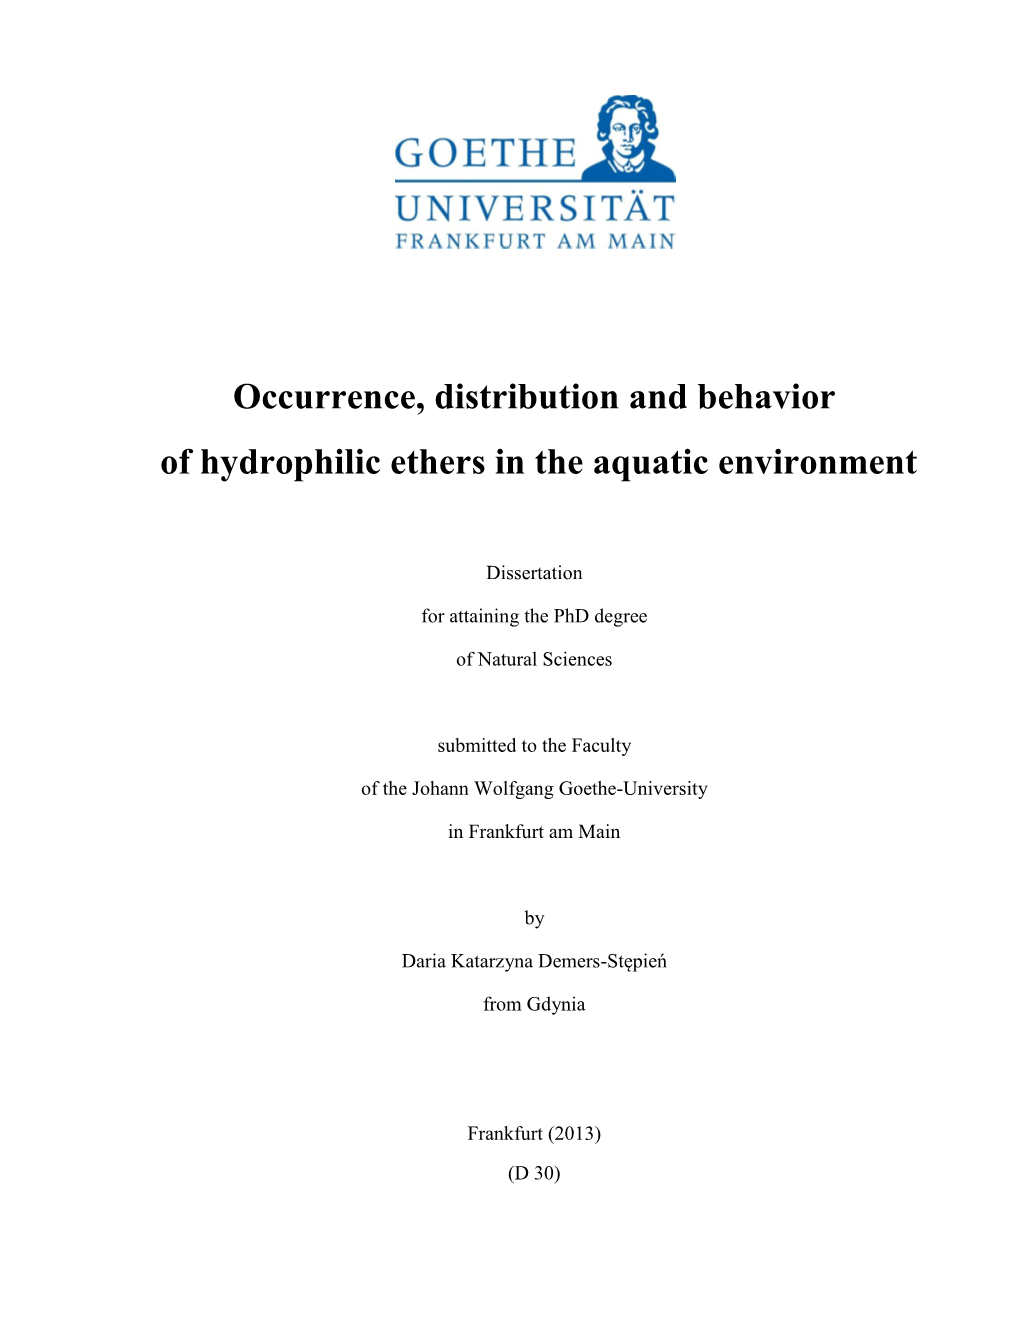 Occurrence, Distribution and Behavior of Hydrophilic Ethers in the Aquatic Environment